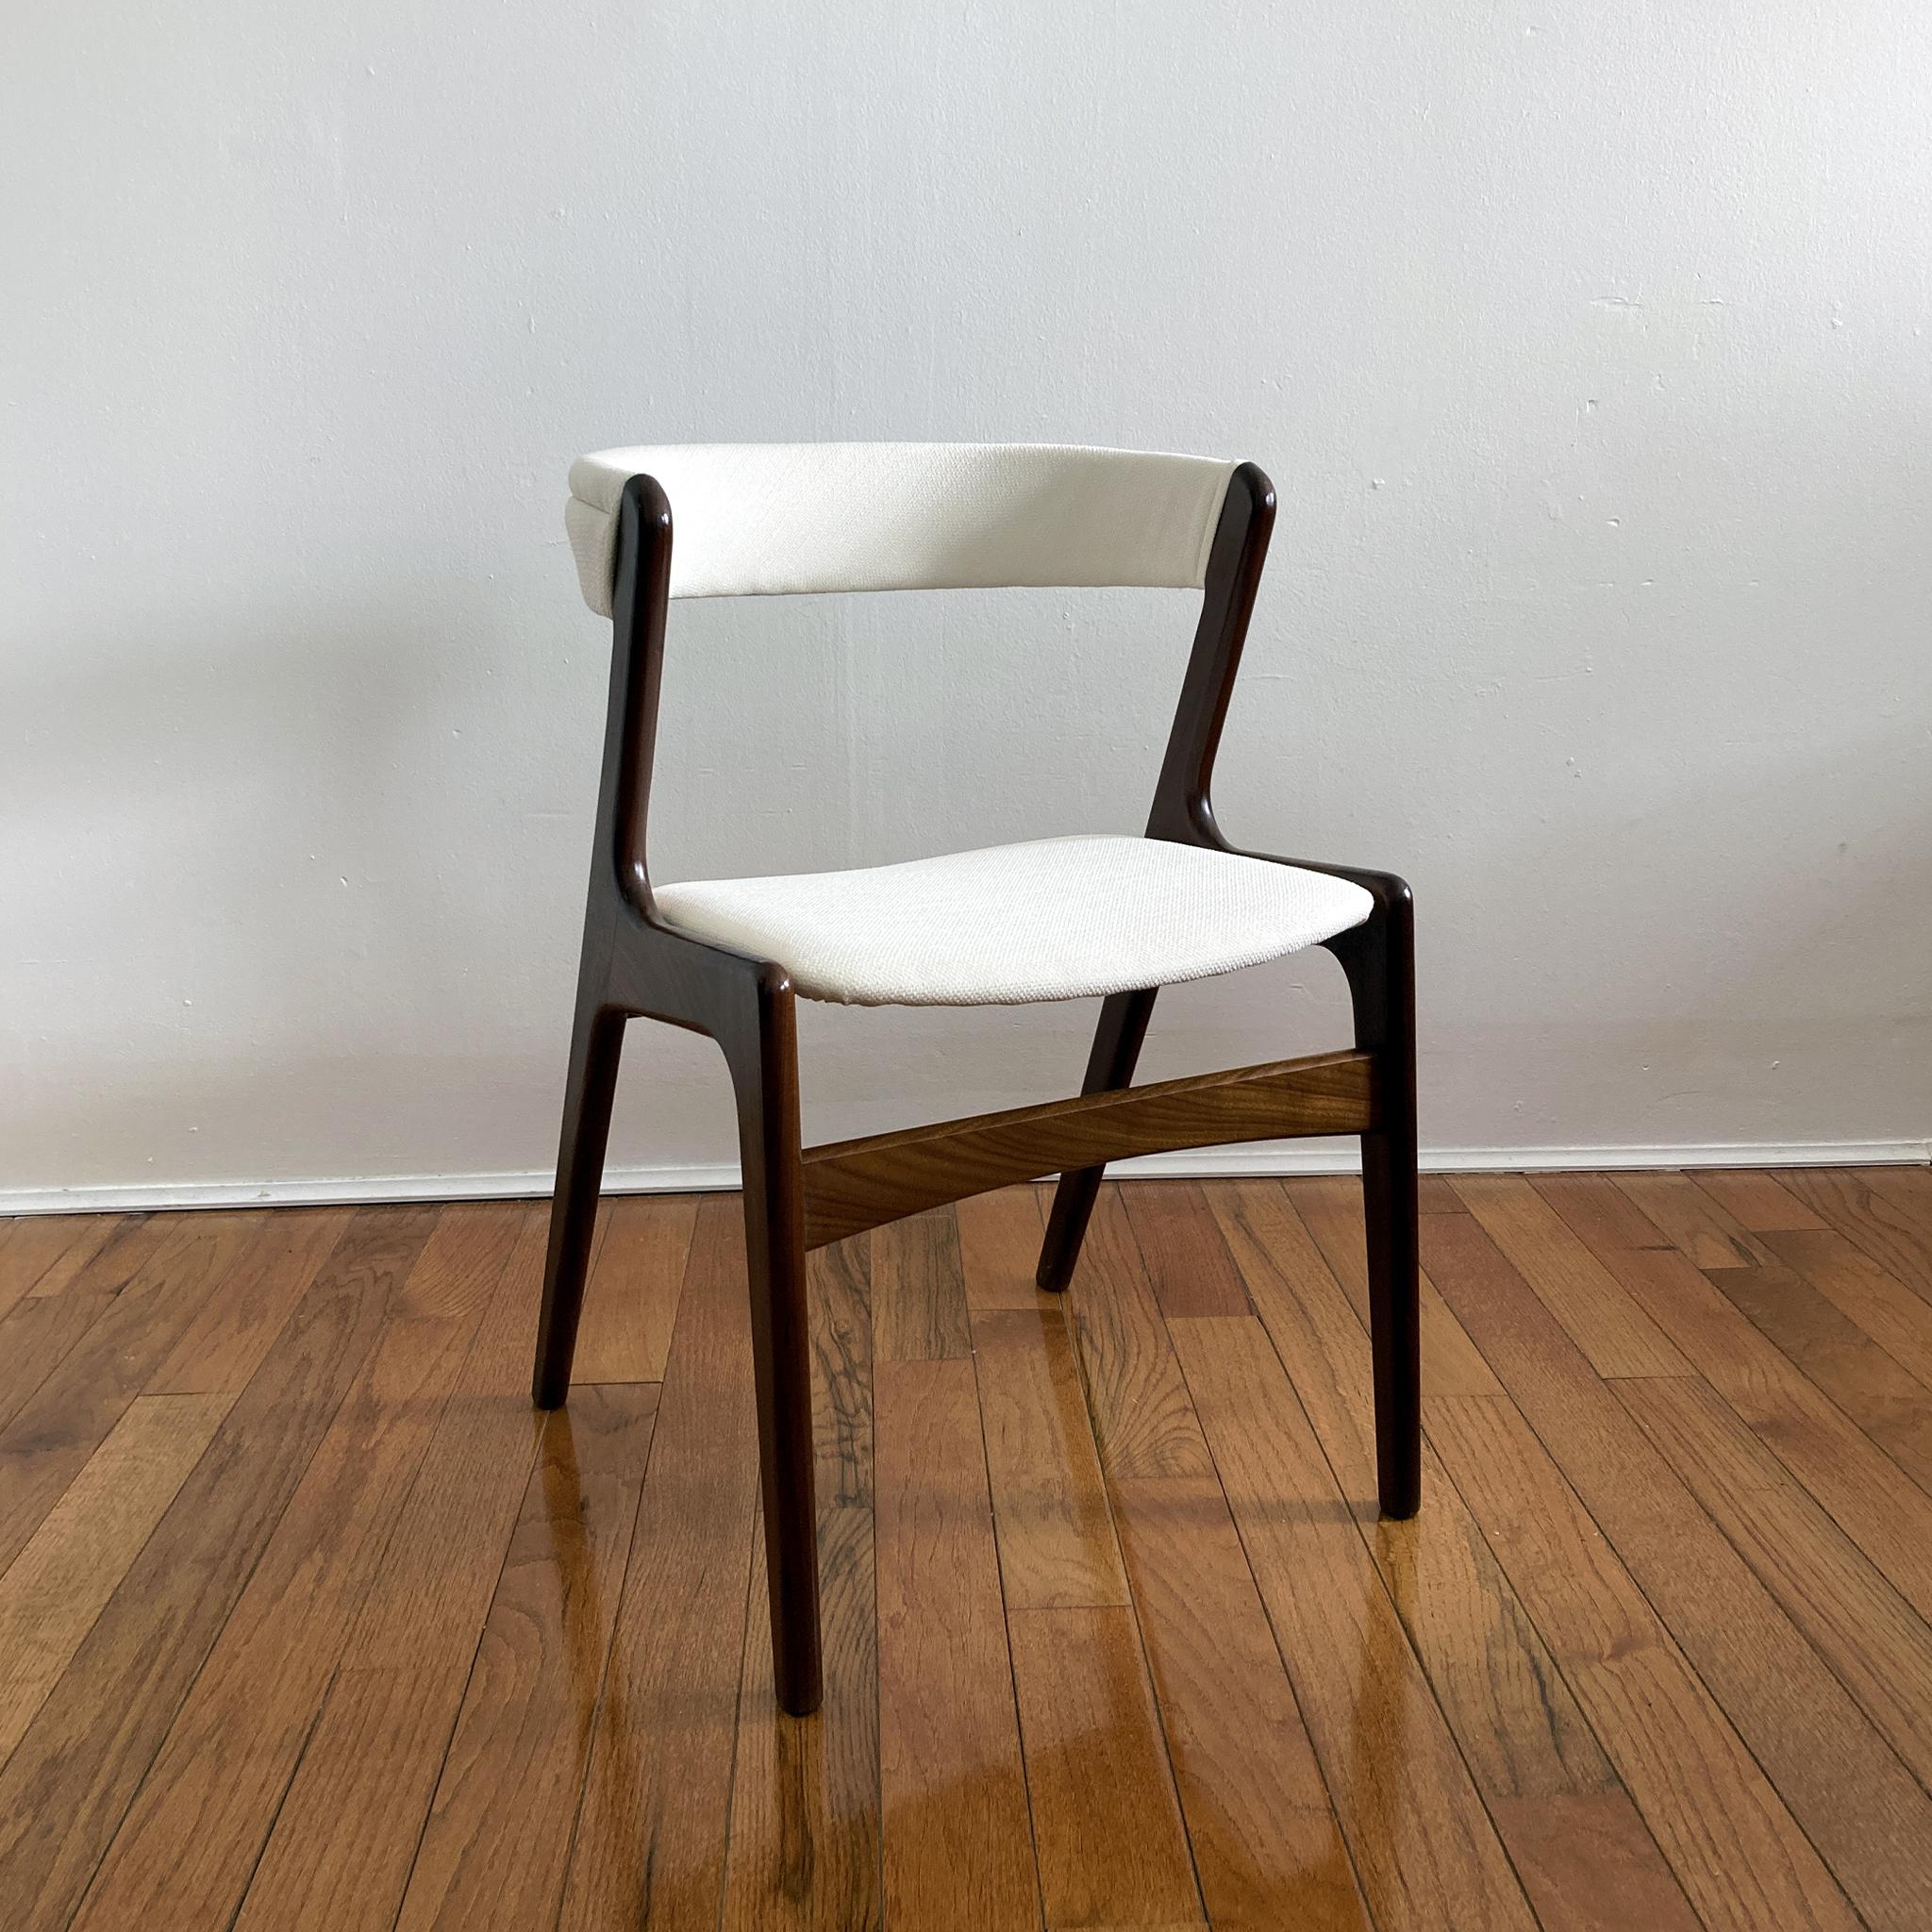 Beautiful midcentury chair, Kai Kristiansen’s iconic curved back chair Silhouette. Teak frame, seat and curved back reupholstered with ivory tweed. Structurally sound, in good vintage condition with very minor scuffs.